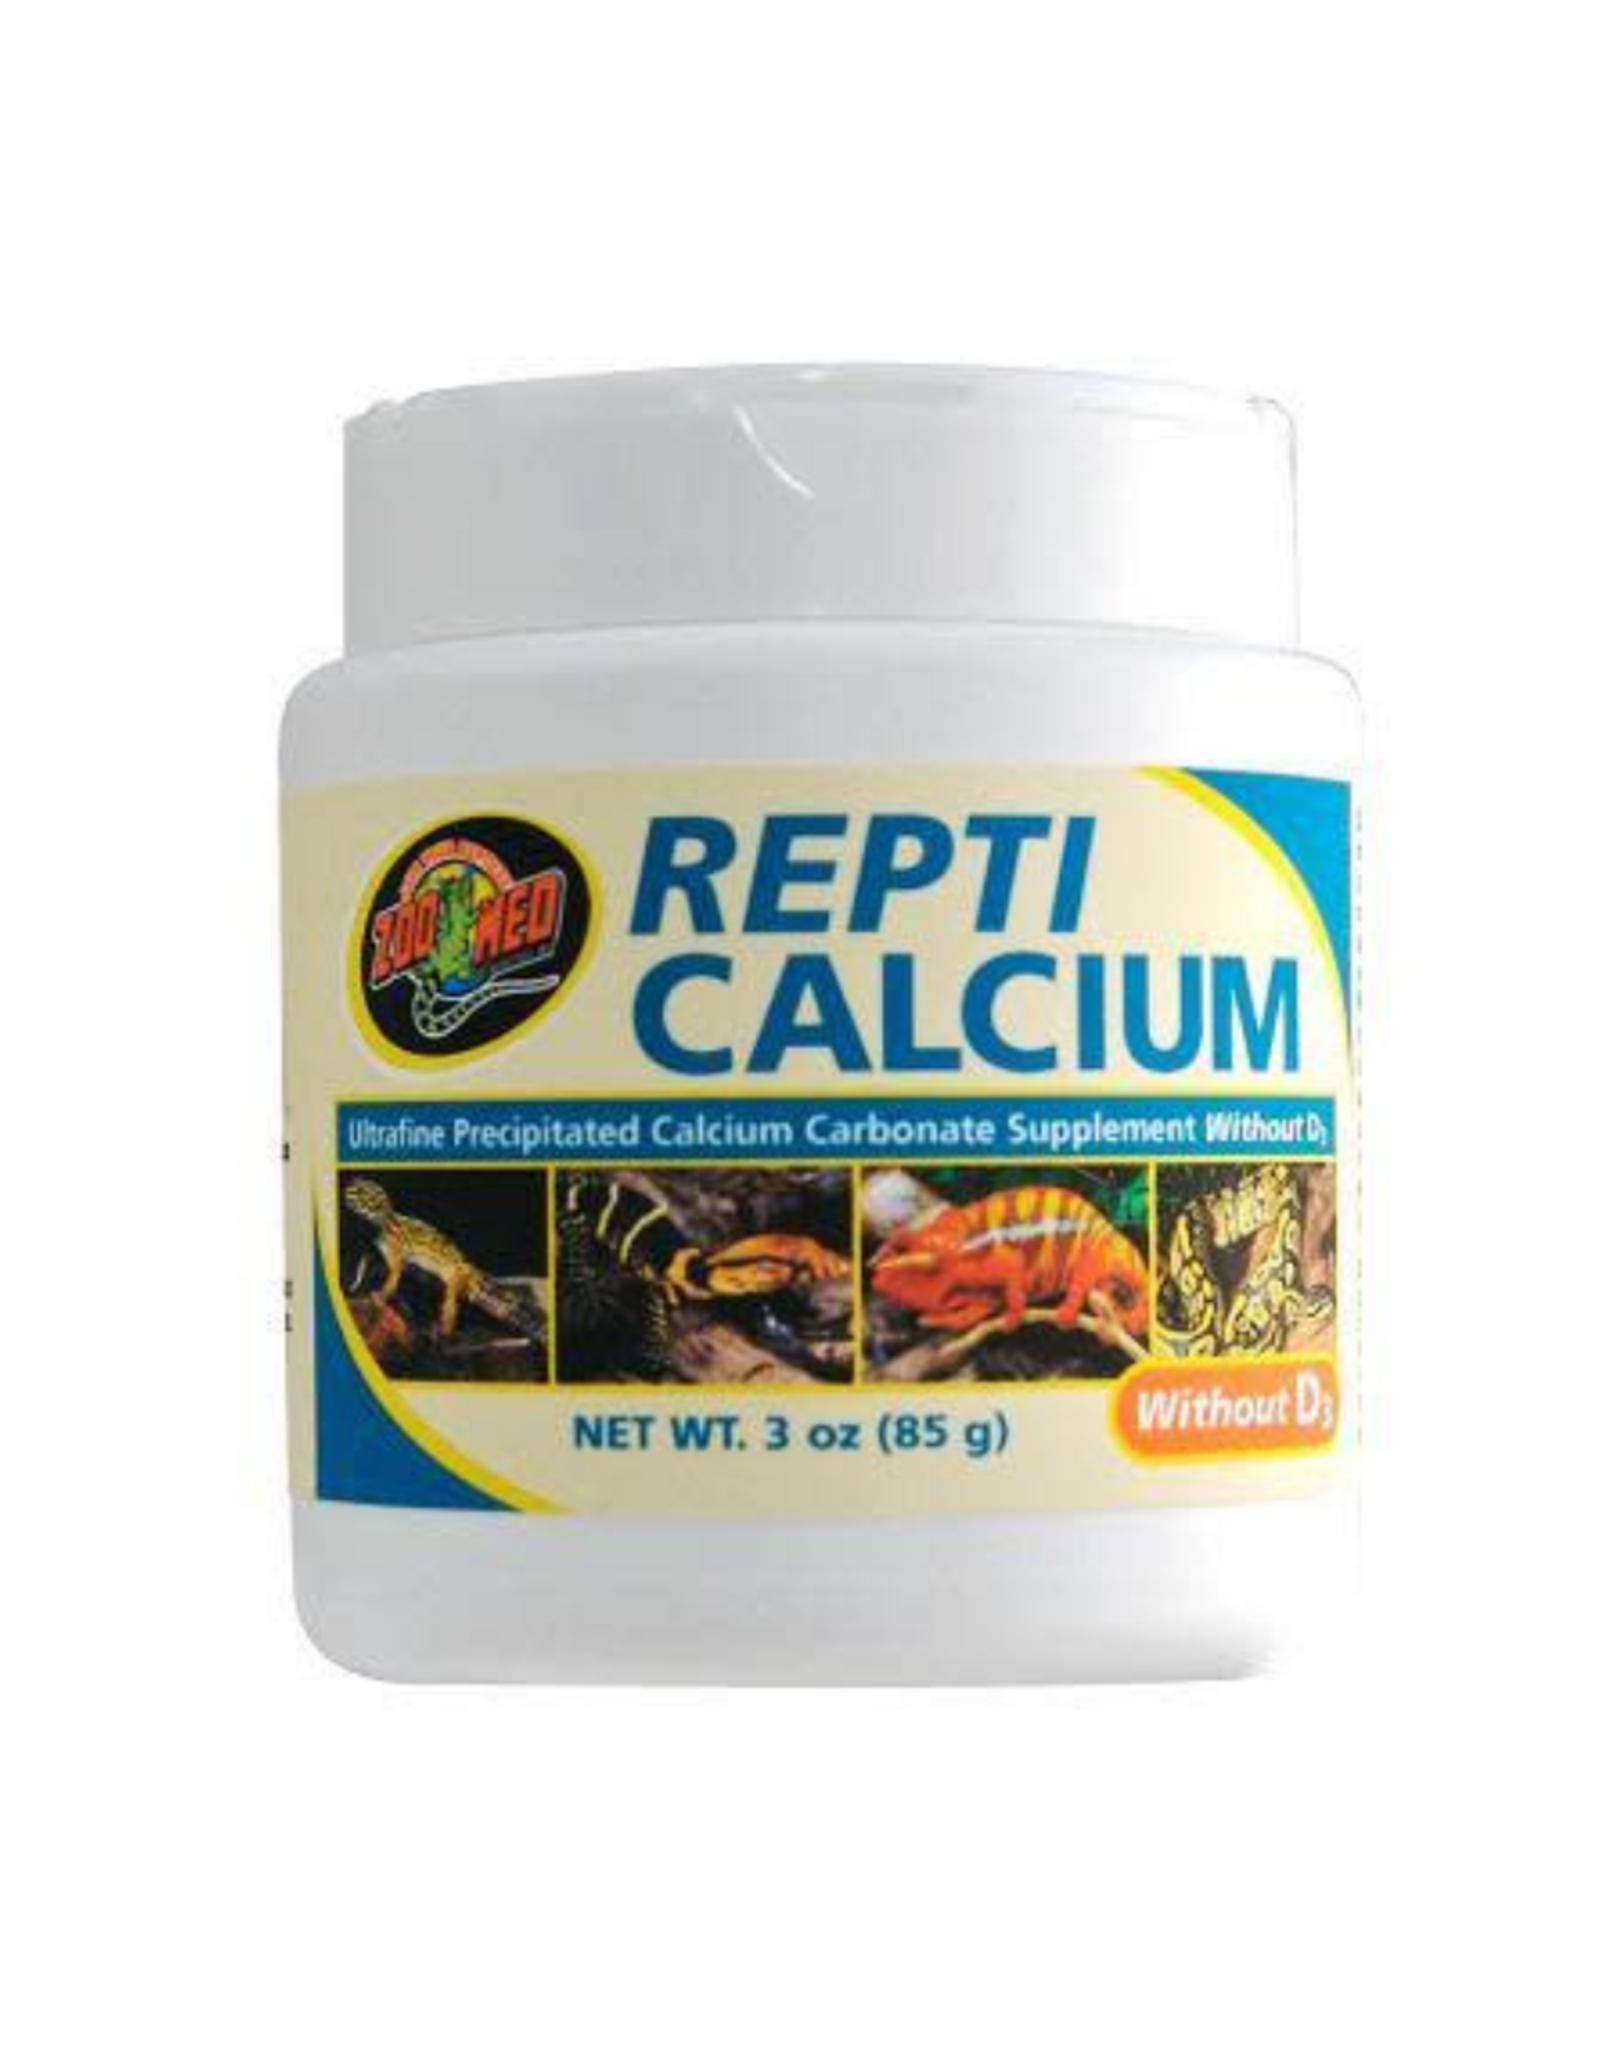 ZOO MED LABORATORIES, INC. ZOO MED- A33-3- REPTI CALCIUM- WITHOUT D3- 4.5X4.5X5- 3 OZ